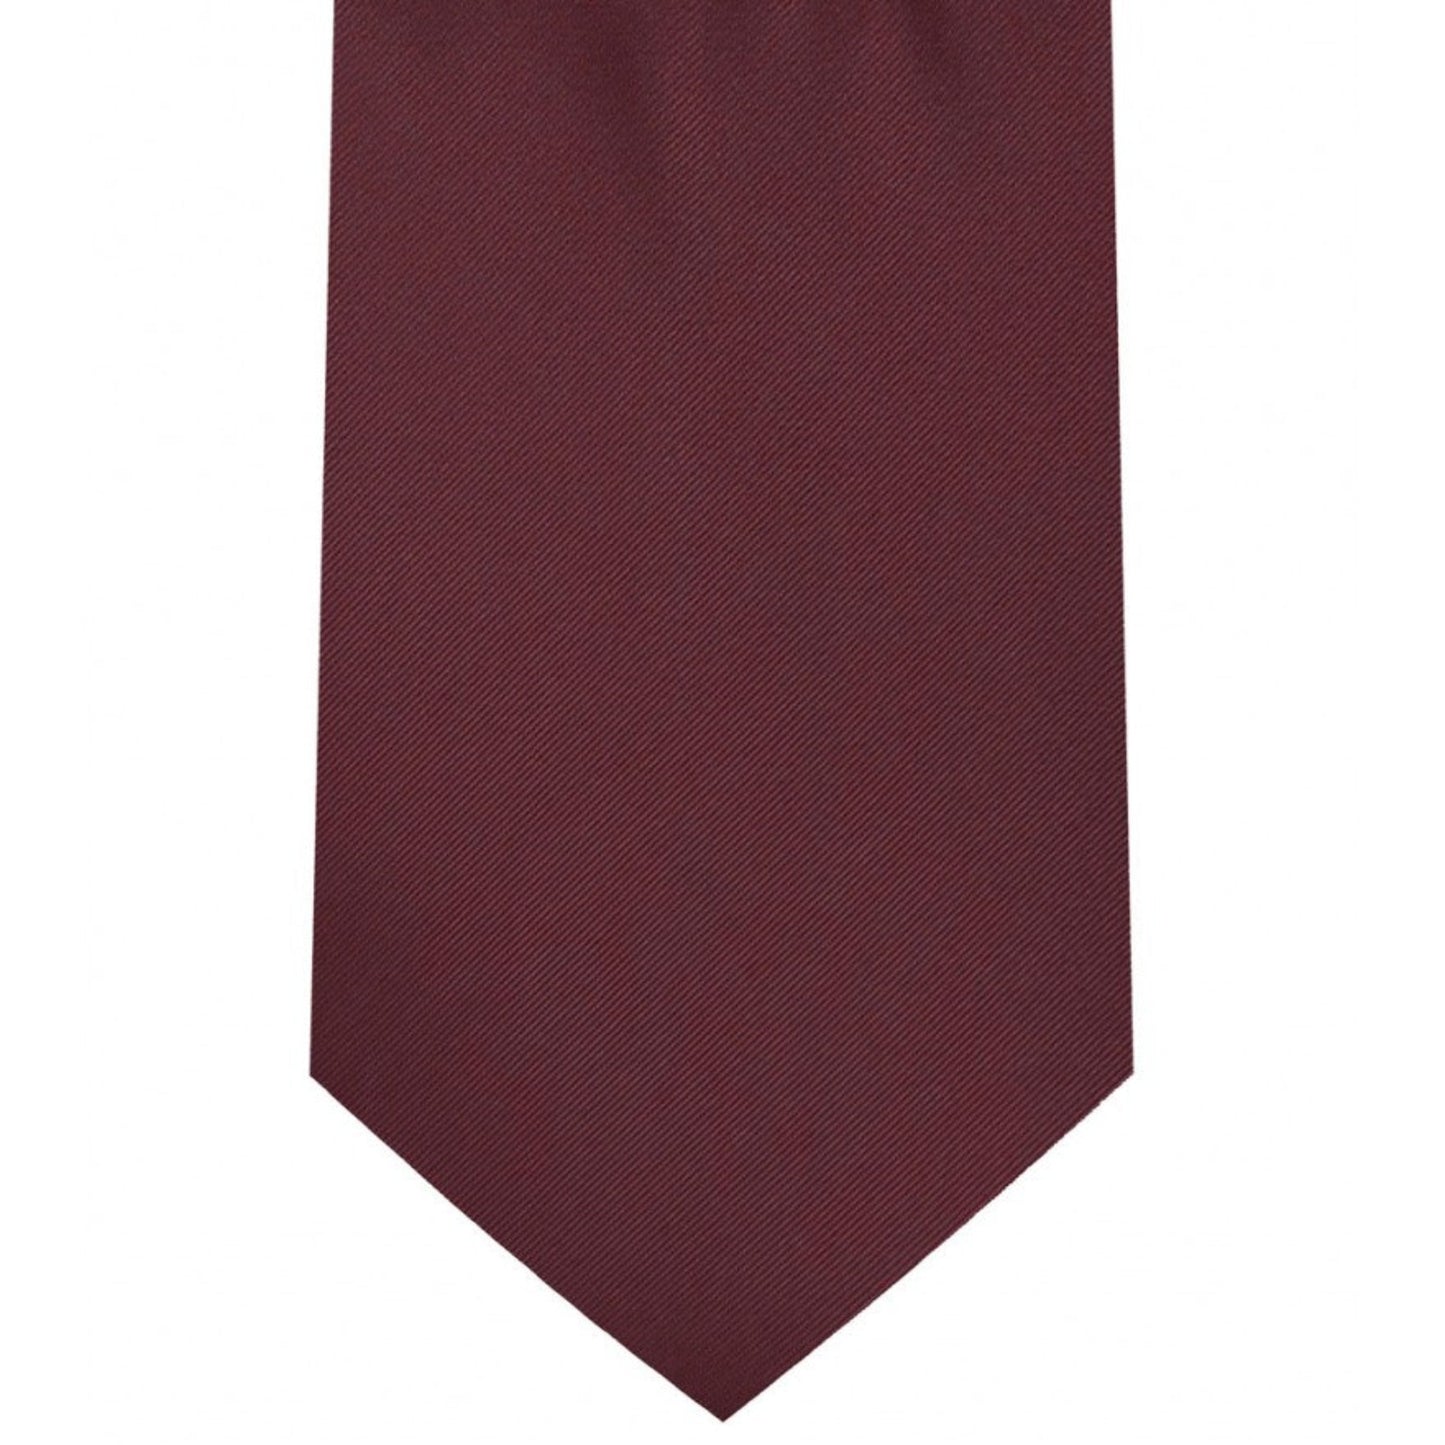 Classic Burgundy Tie Regular width 3.5 inches With Matching Pocket Square | KCT Menswear